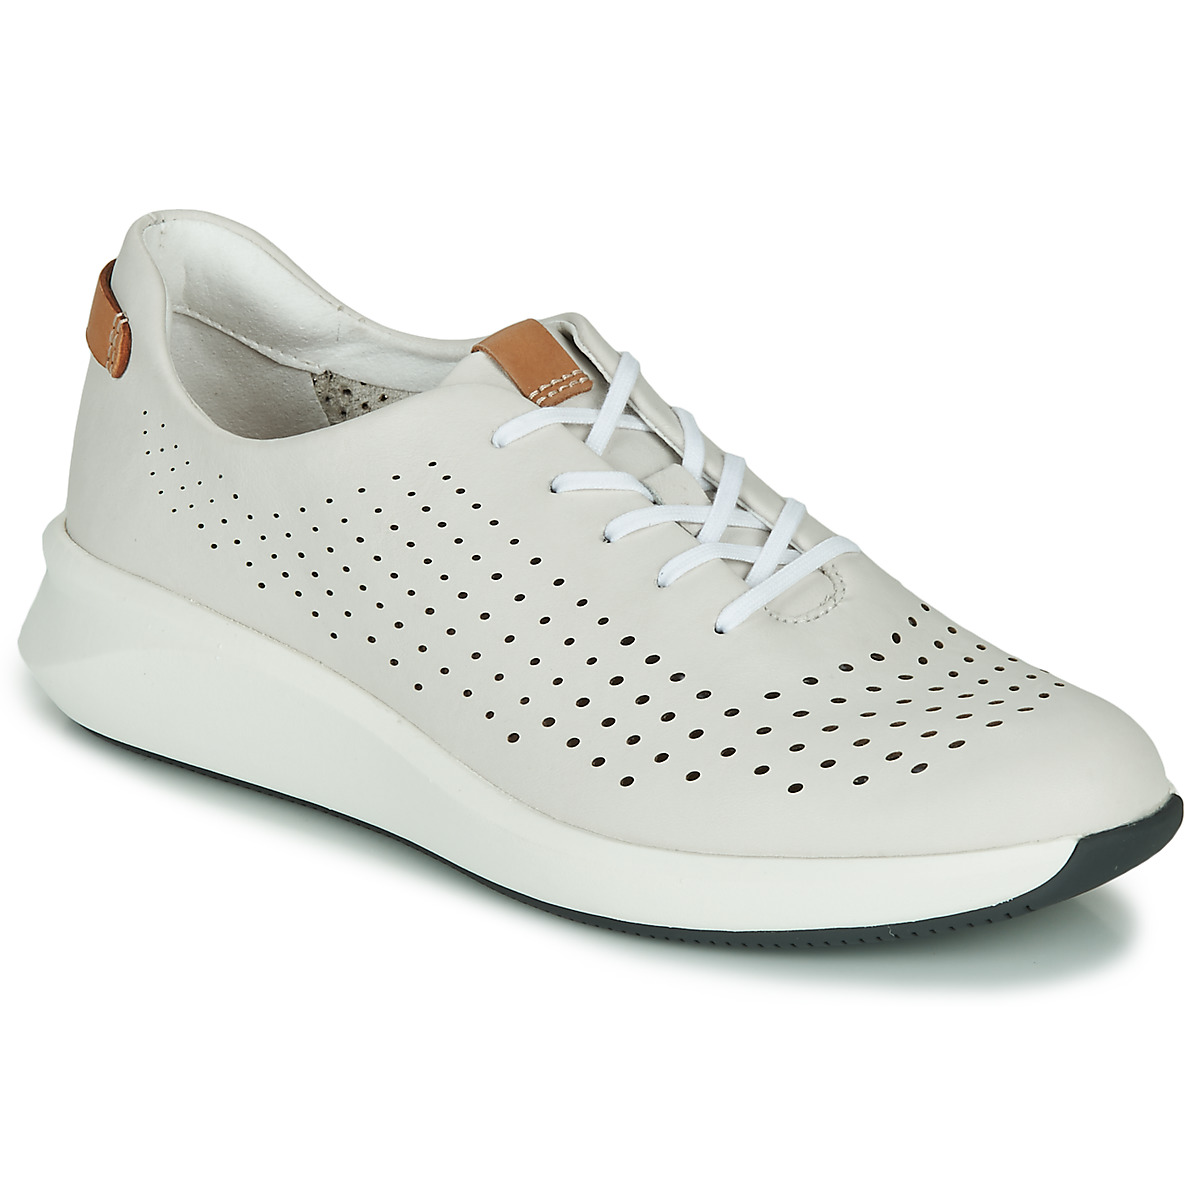 Clarks UN RIO TIE White - delivery | Spartoo Europe ! - Low top trainers Women 96,80 €